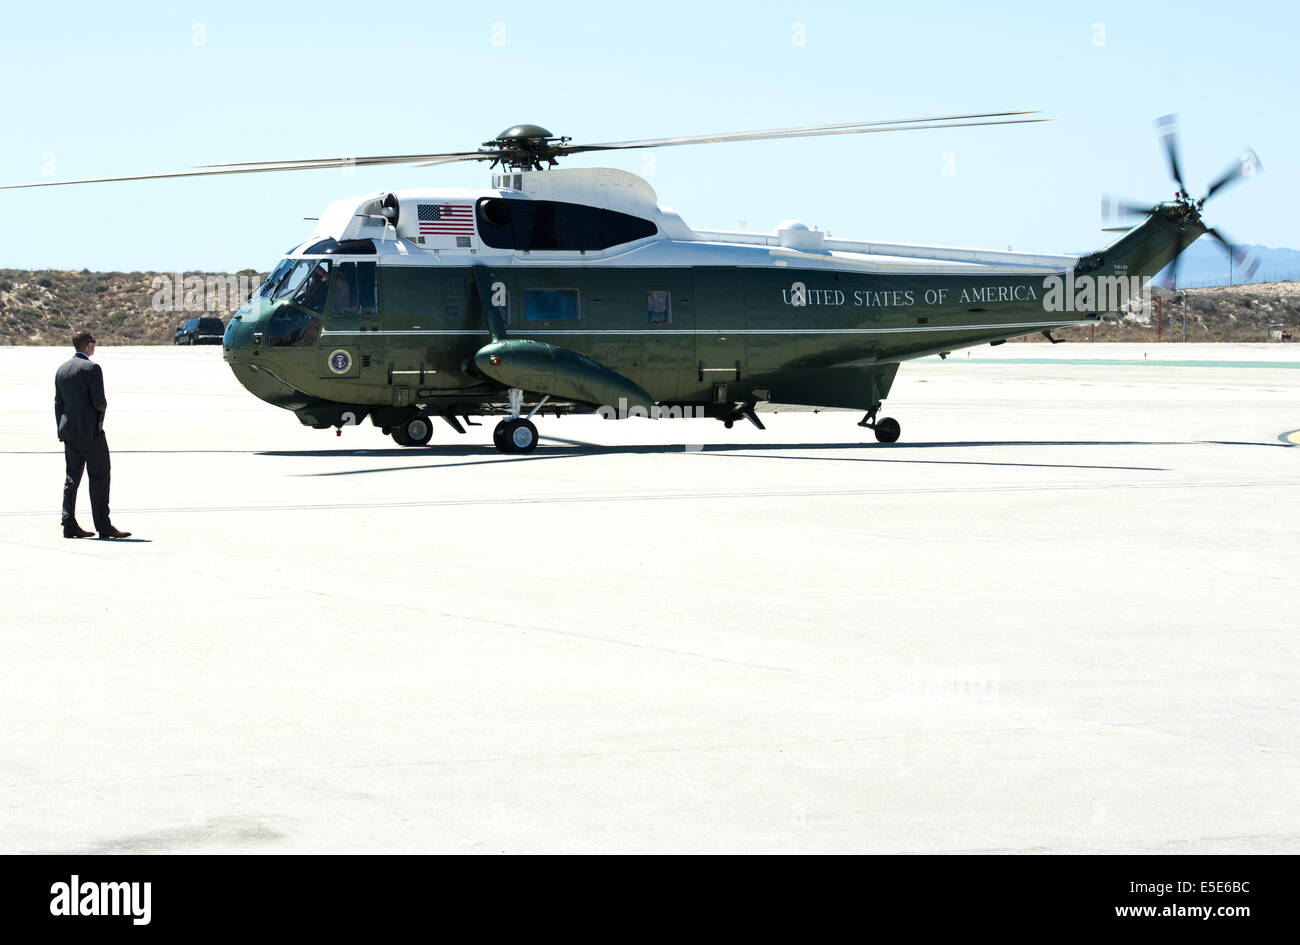 July 23, 2014 - Los Angeles, California, U.S - Marine One --- Marine One on the tarmac at LAX on Wednesday July 23, 2014, taxis past a Secret Service Agent. Sikorsky's SH-3 Sea King helicopter has been in use by the US Marine Corps' HMX-1 squadron as the first choice for Marine One since not long after it was placed in service by the US Navy in 1961.  The familiar metallic green with white top Sea King is transported, along with the presidential limousine and other large equipment via a set of several C-17 Boeing Globemaster transport aircraft operated by the US Air Force.  US Navy specificati Stock Photo